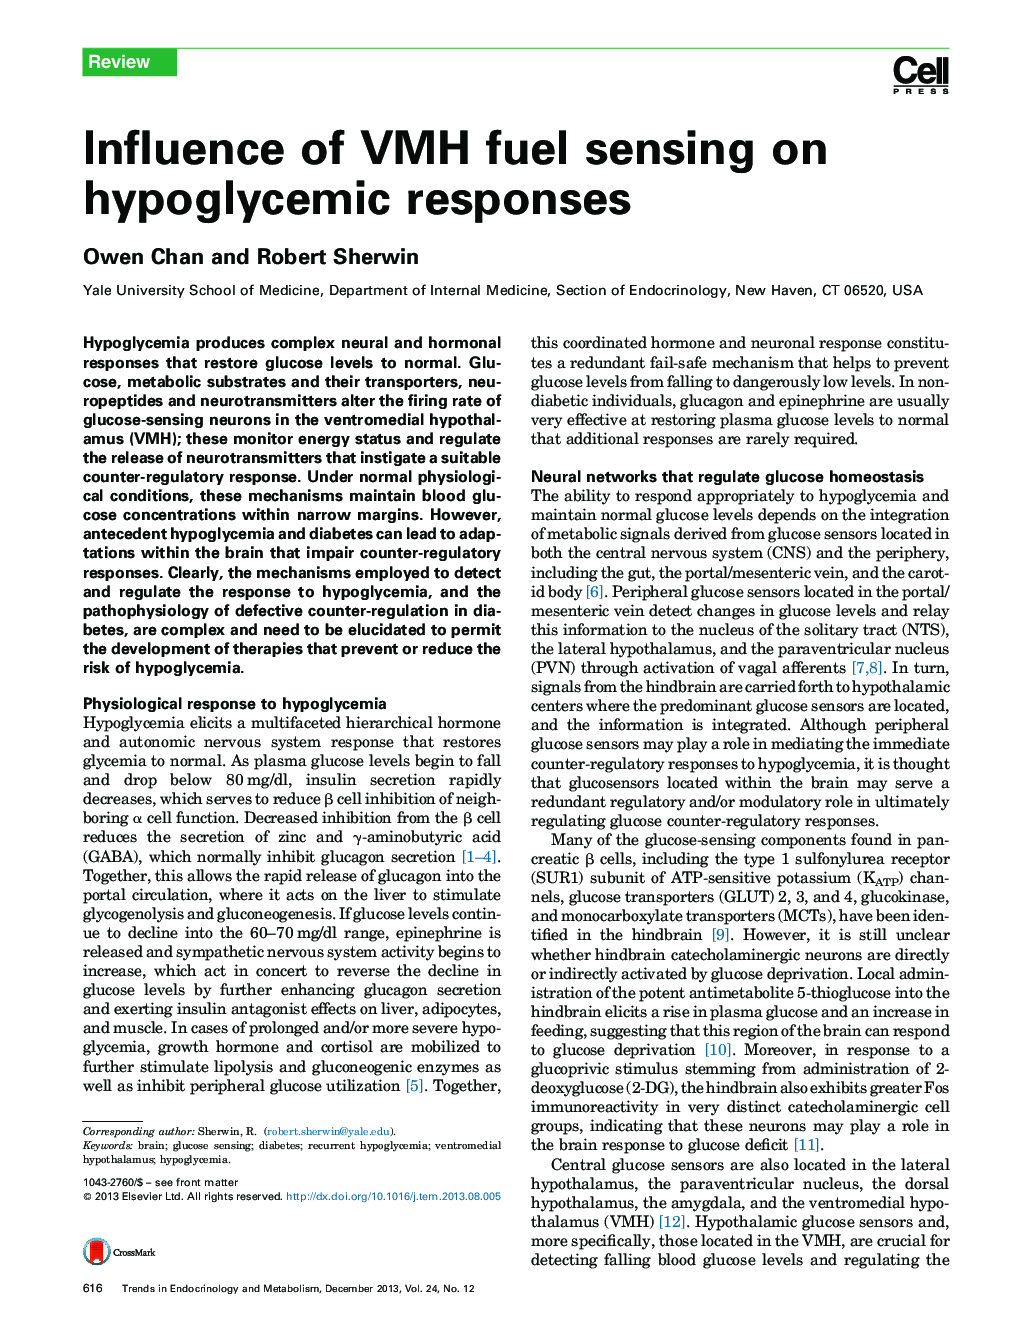 Influence of VMH fuel sensing on hypoglycemic responses